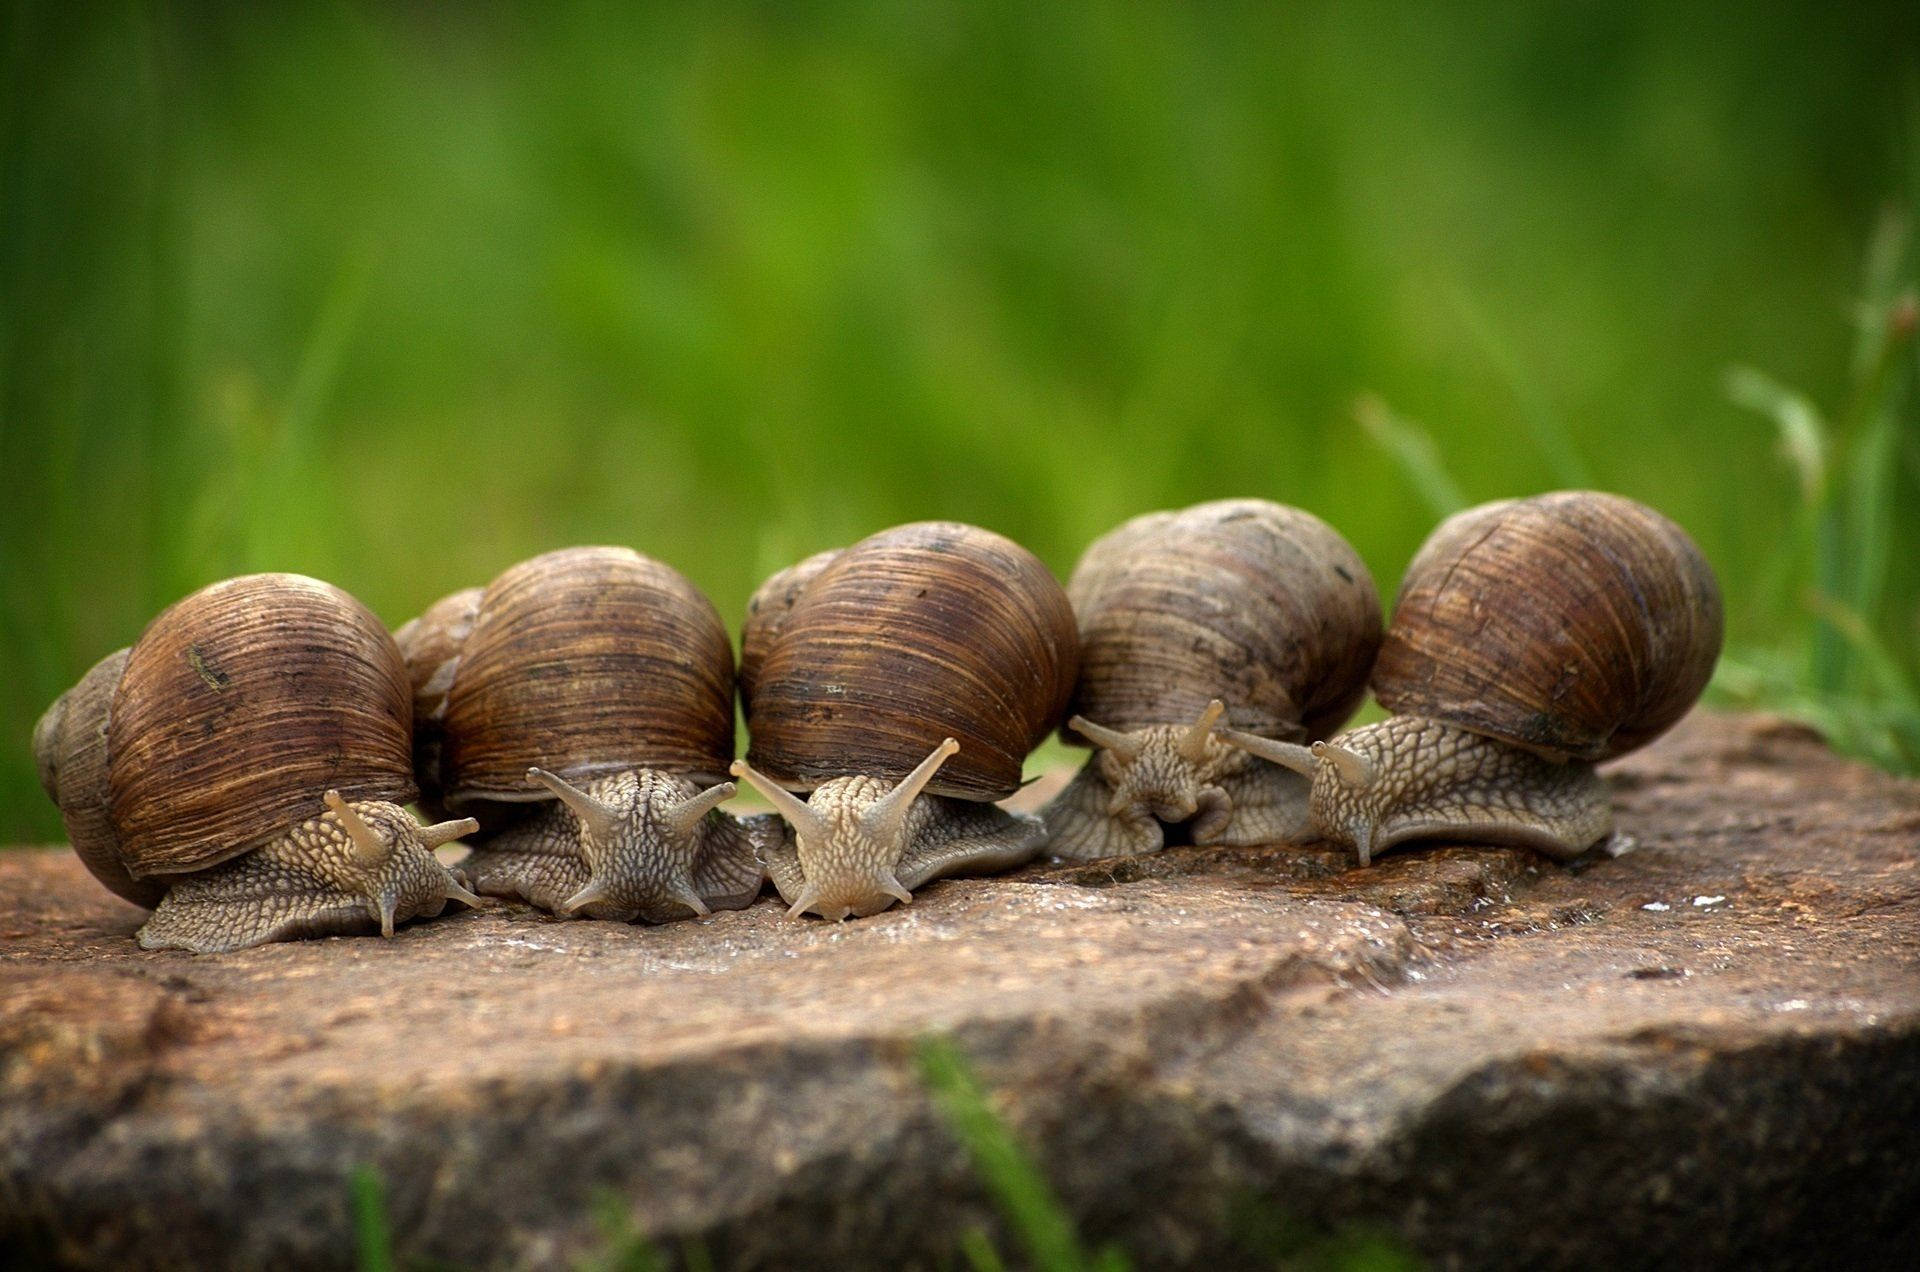 Caption: Group of Burgundy Snails in their Natural Habitat Wallpaper